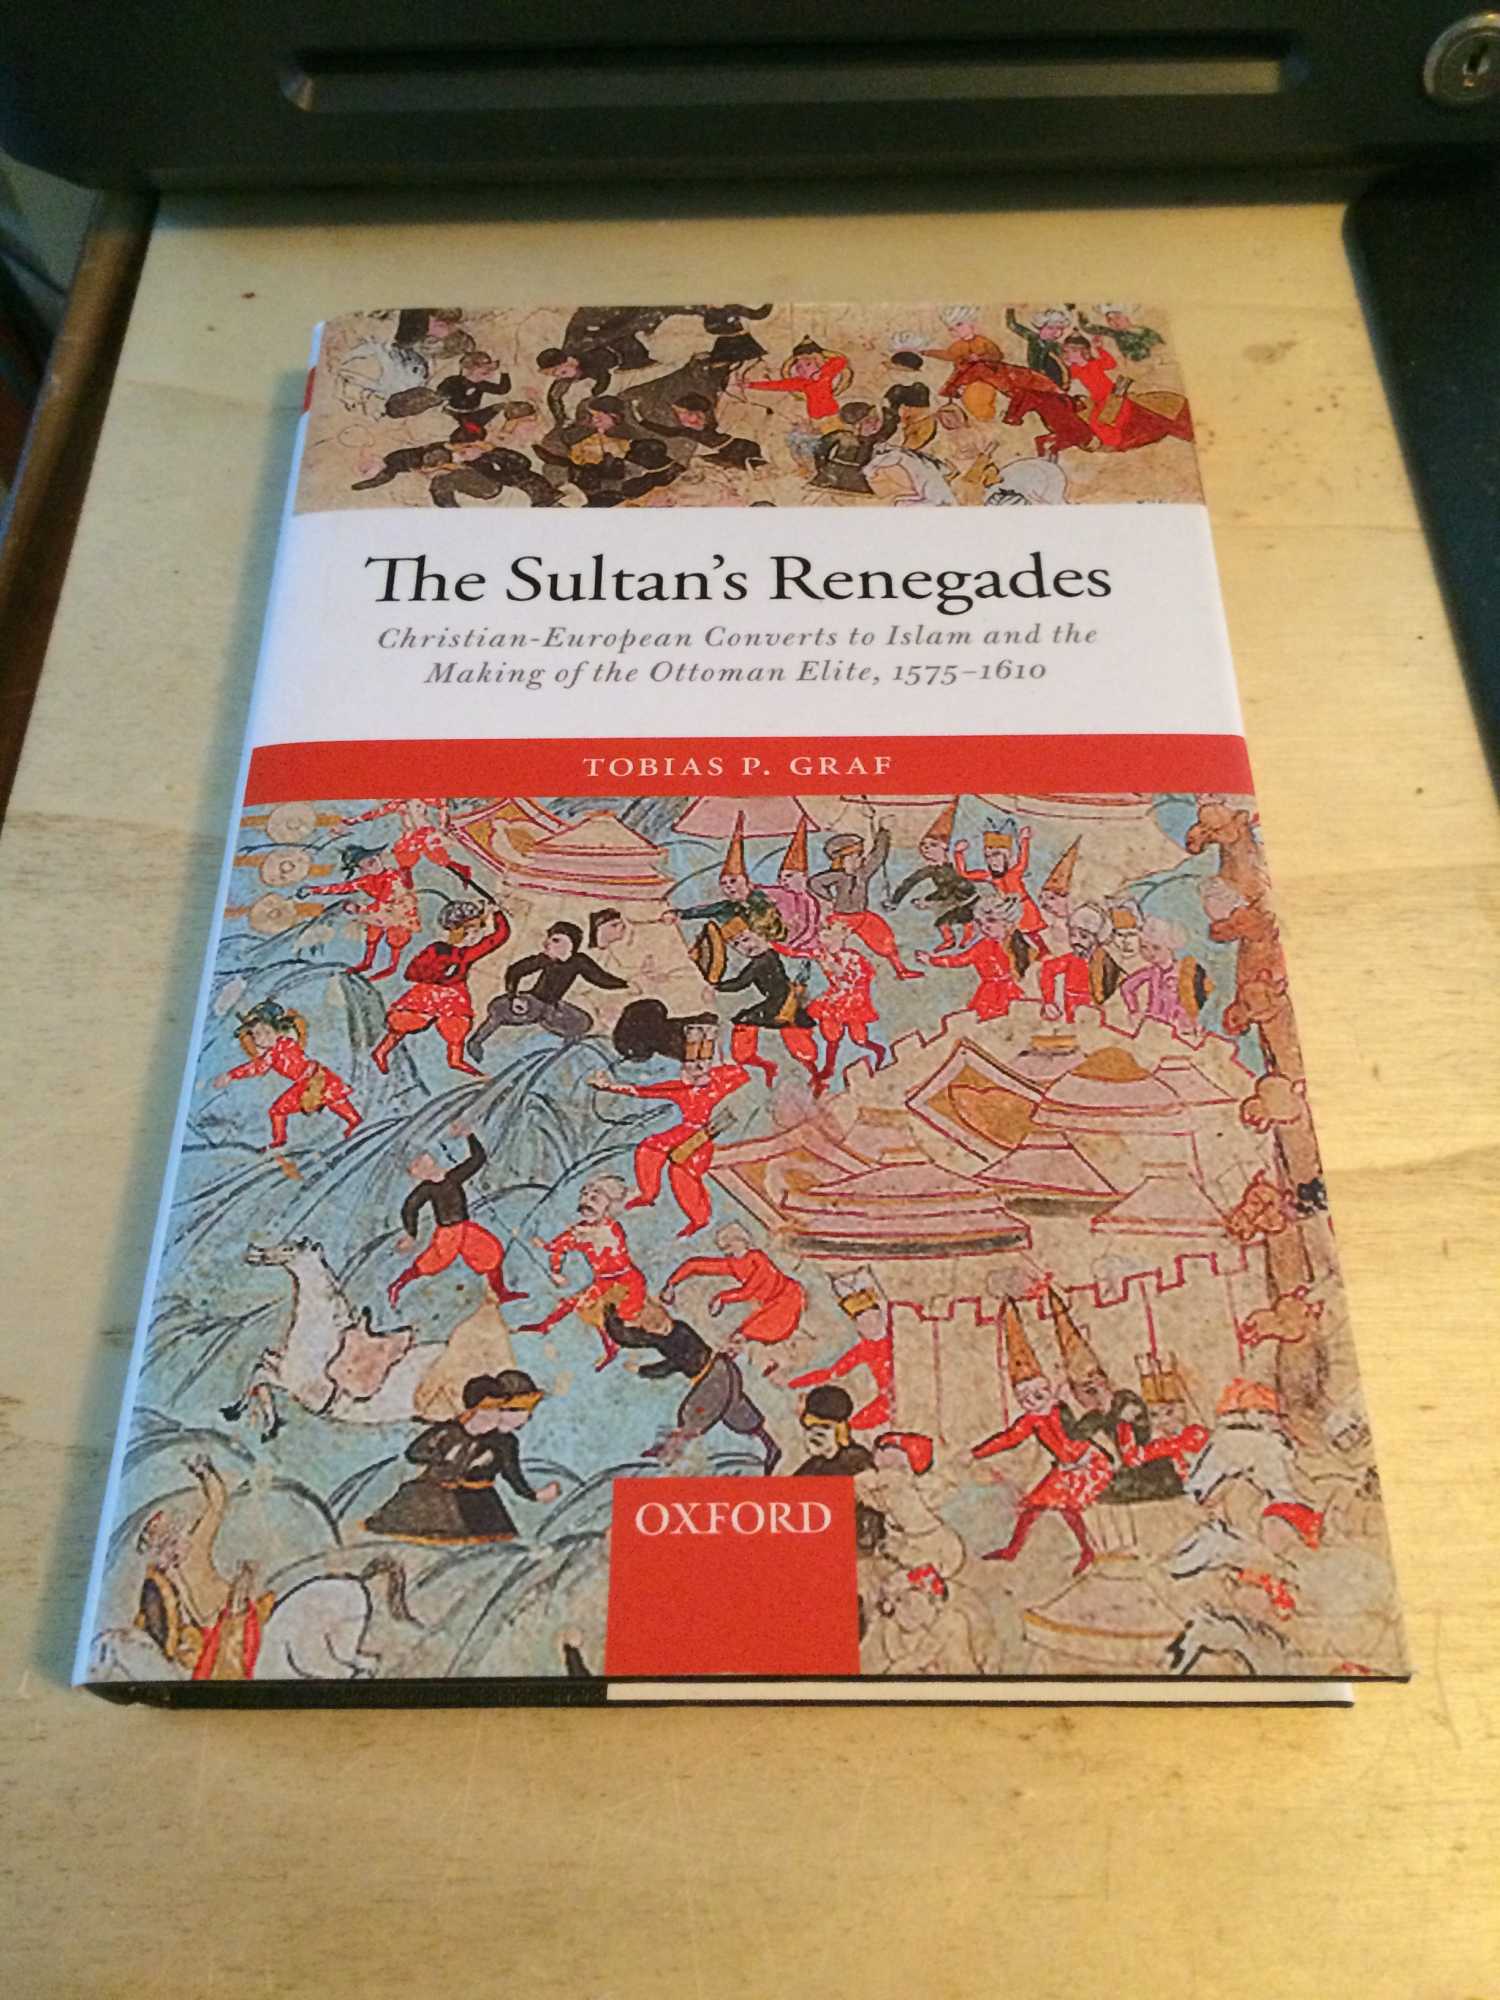 The Sultan's Renegades: Christian-European Converts to Islam and the Making of the Ottoman Elite, 1575-1610 - Graf, Tobias P.